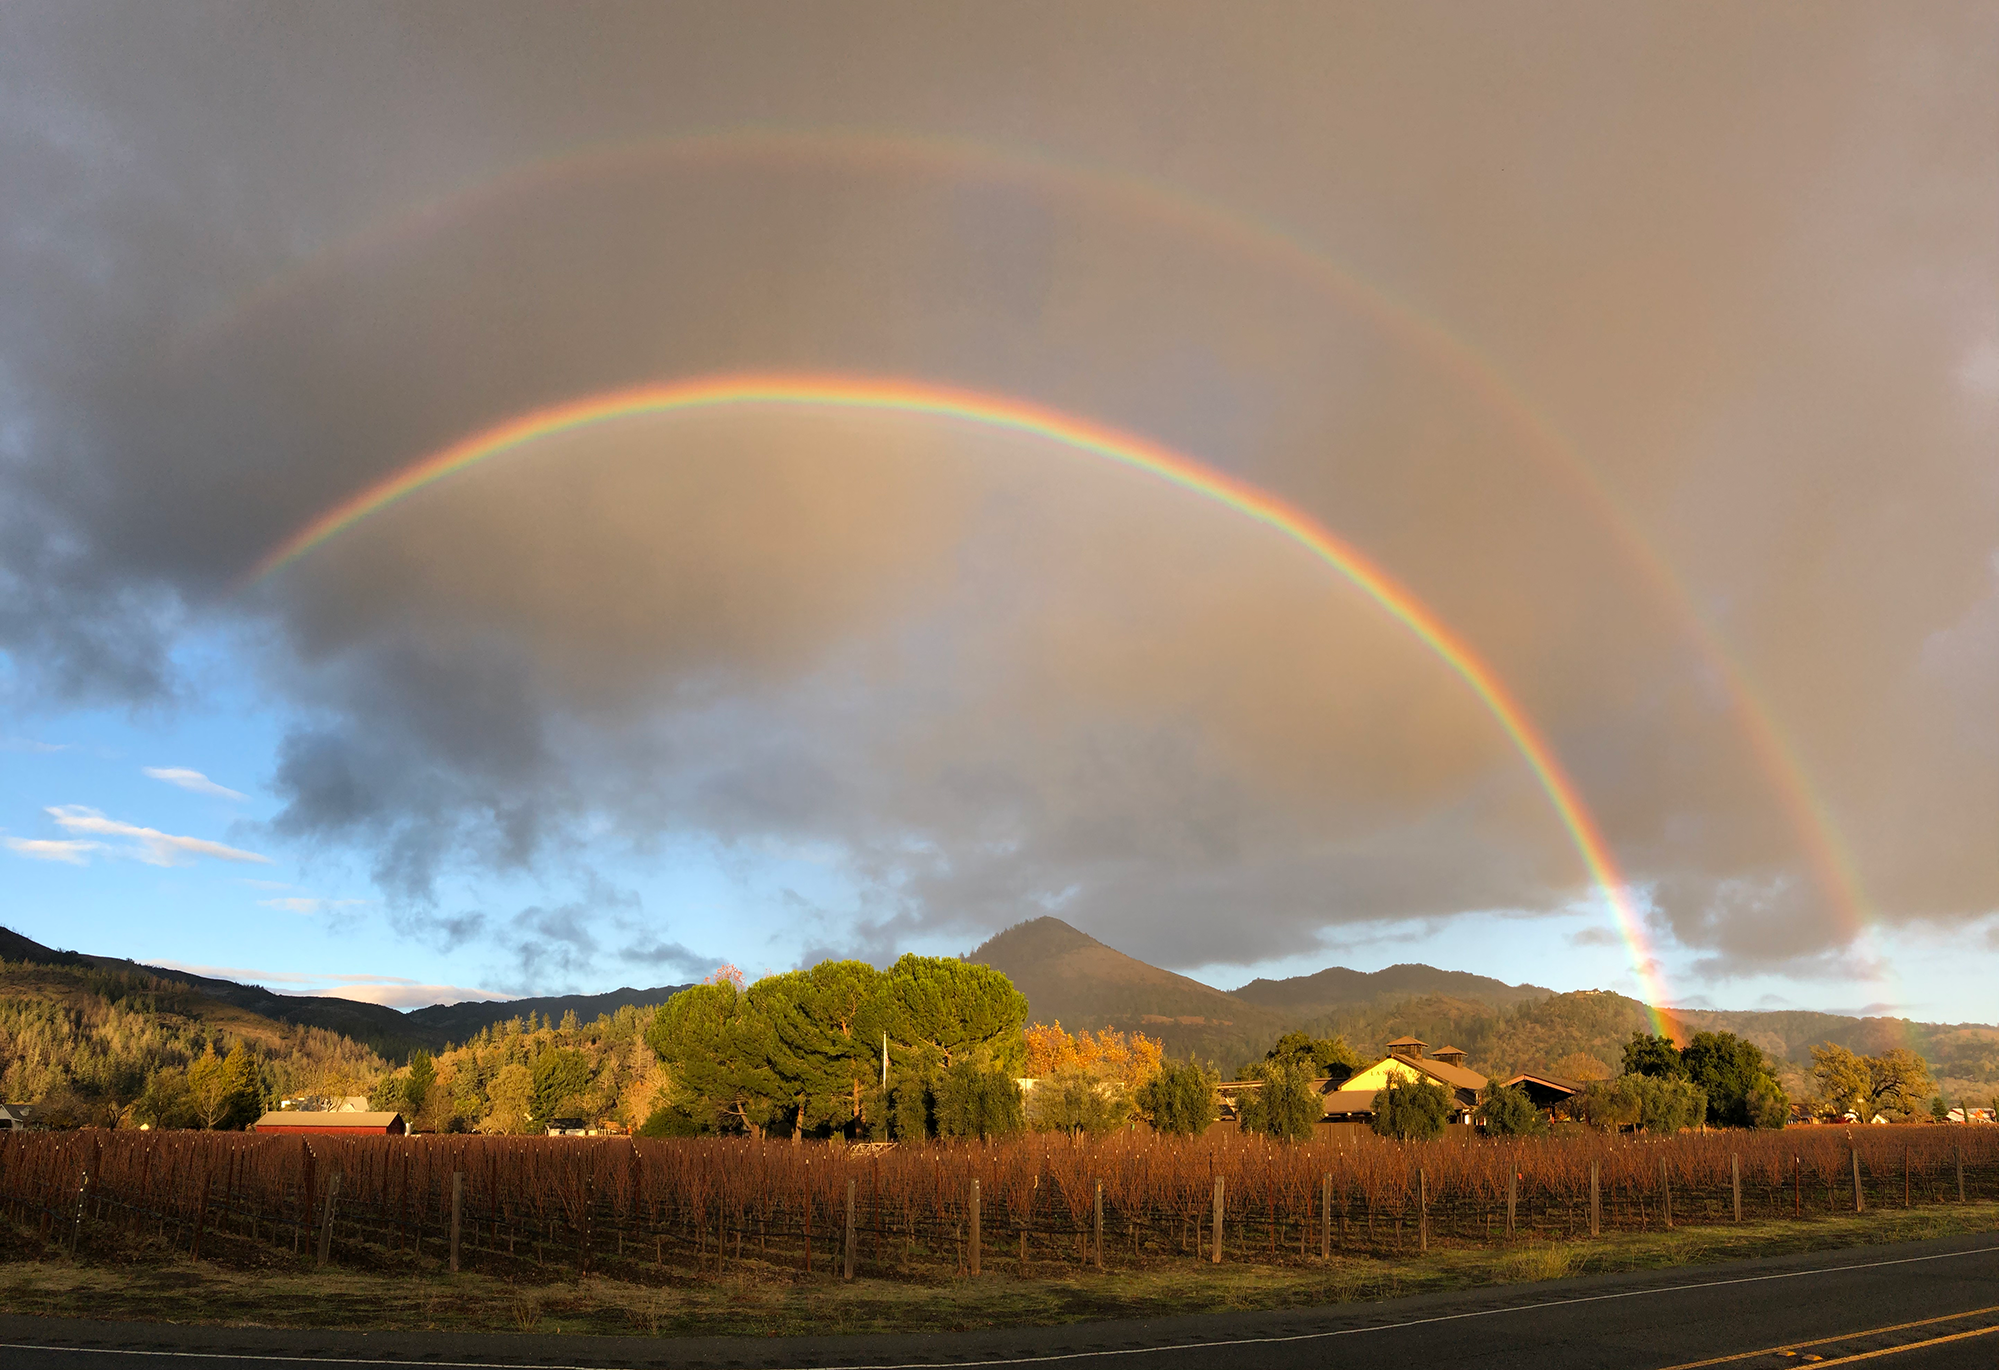 A double rainbow against a mountain with vineyards below, and beige and grey clouds.